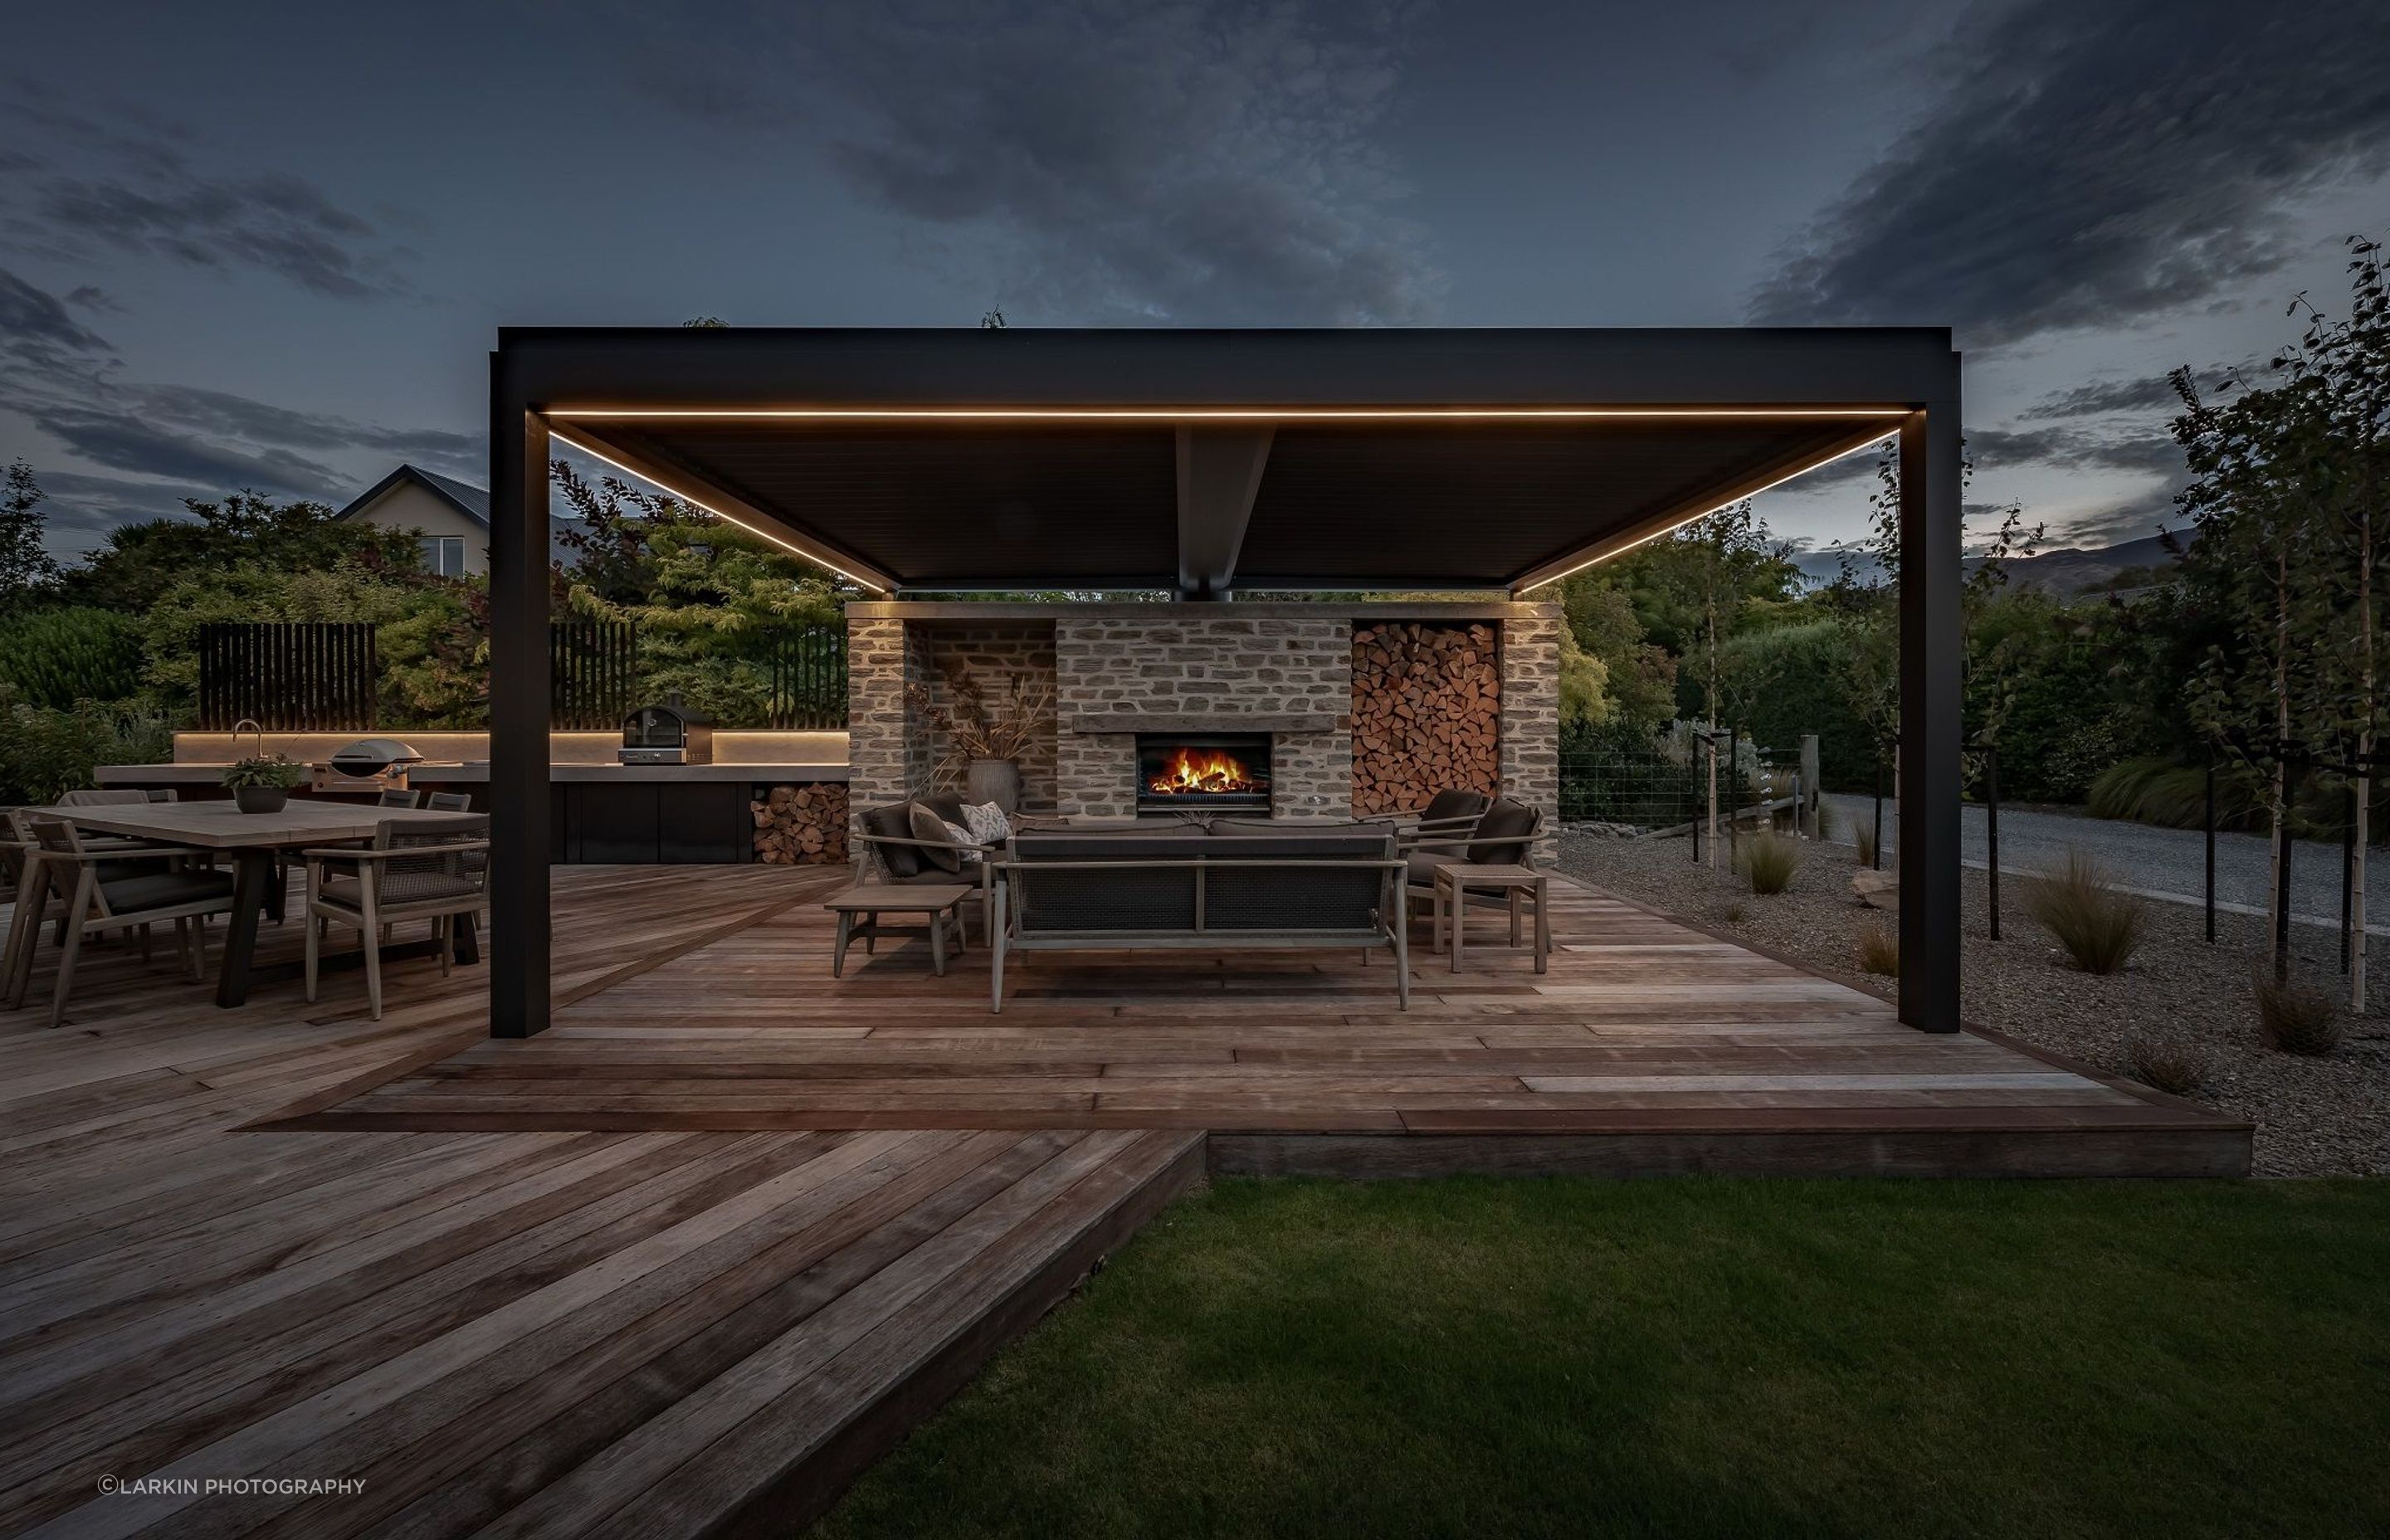 The outdoor pavilion was designed as a separate form to the home, to give the sense of having another entertaining spot to utilise like you would on a resort.